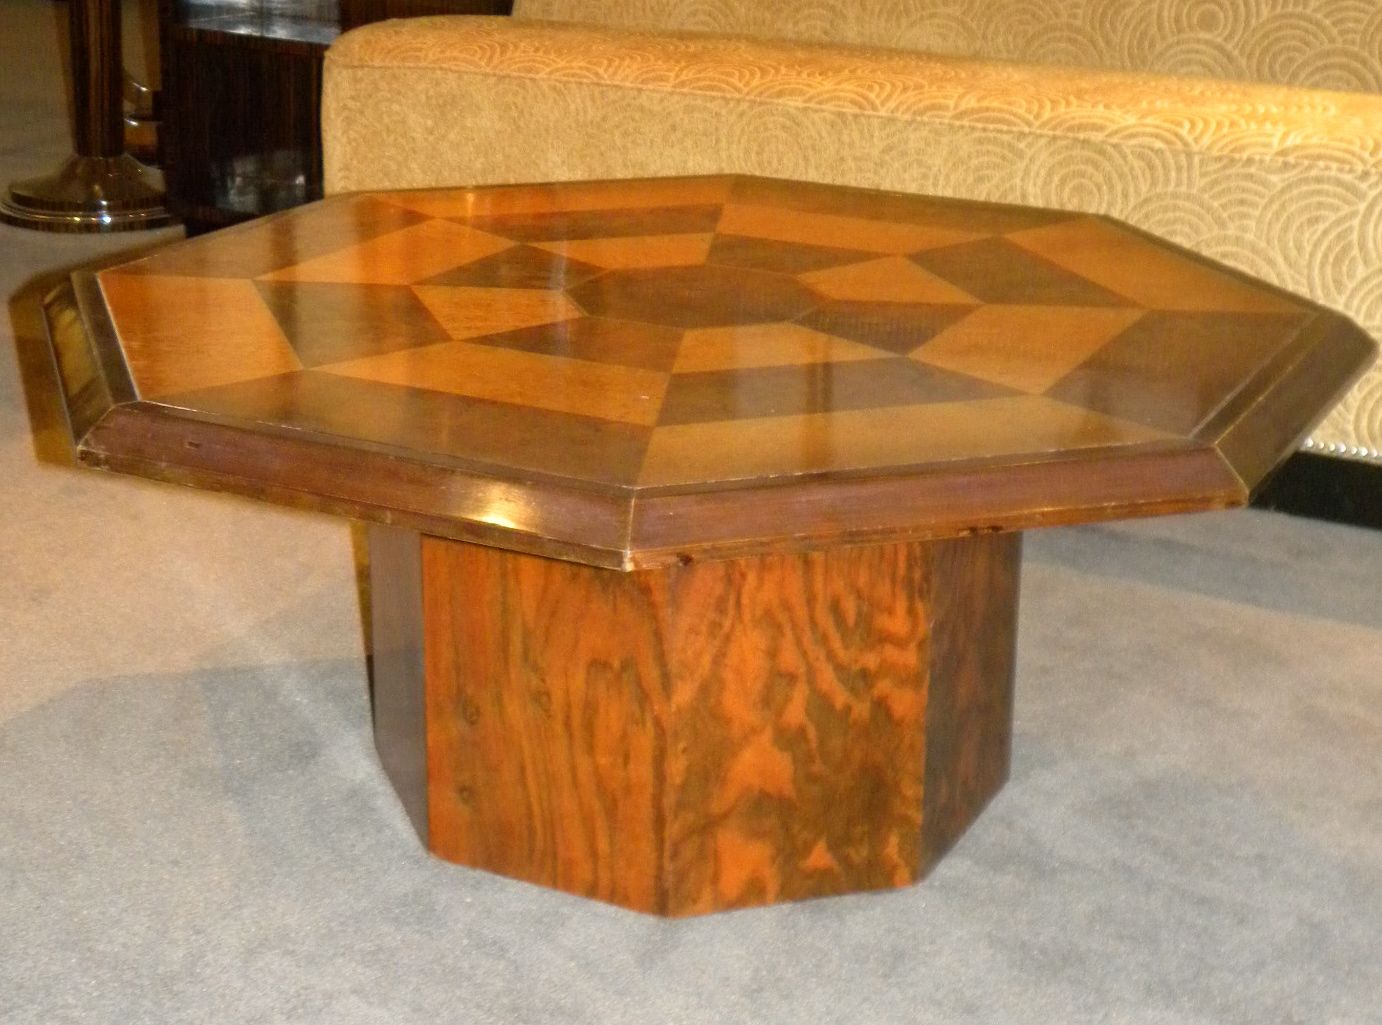 Octagon Glass Dining Room Table With Diamonds